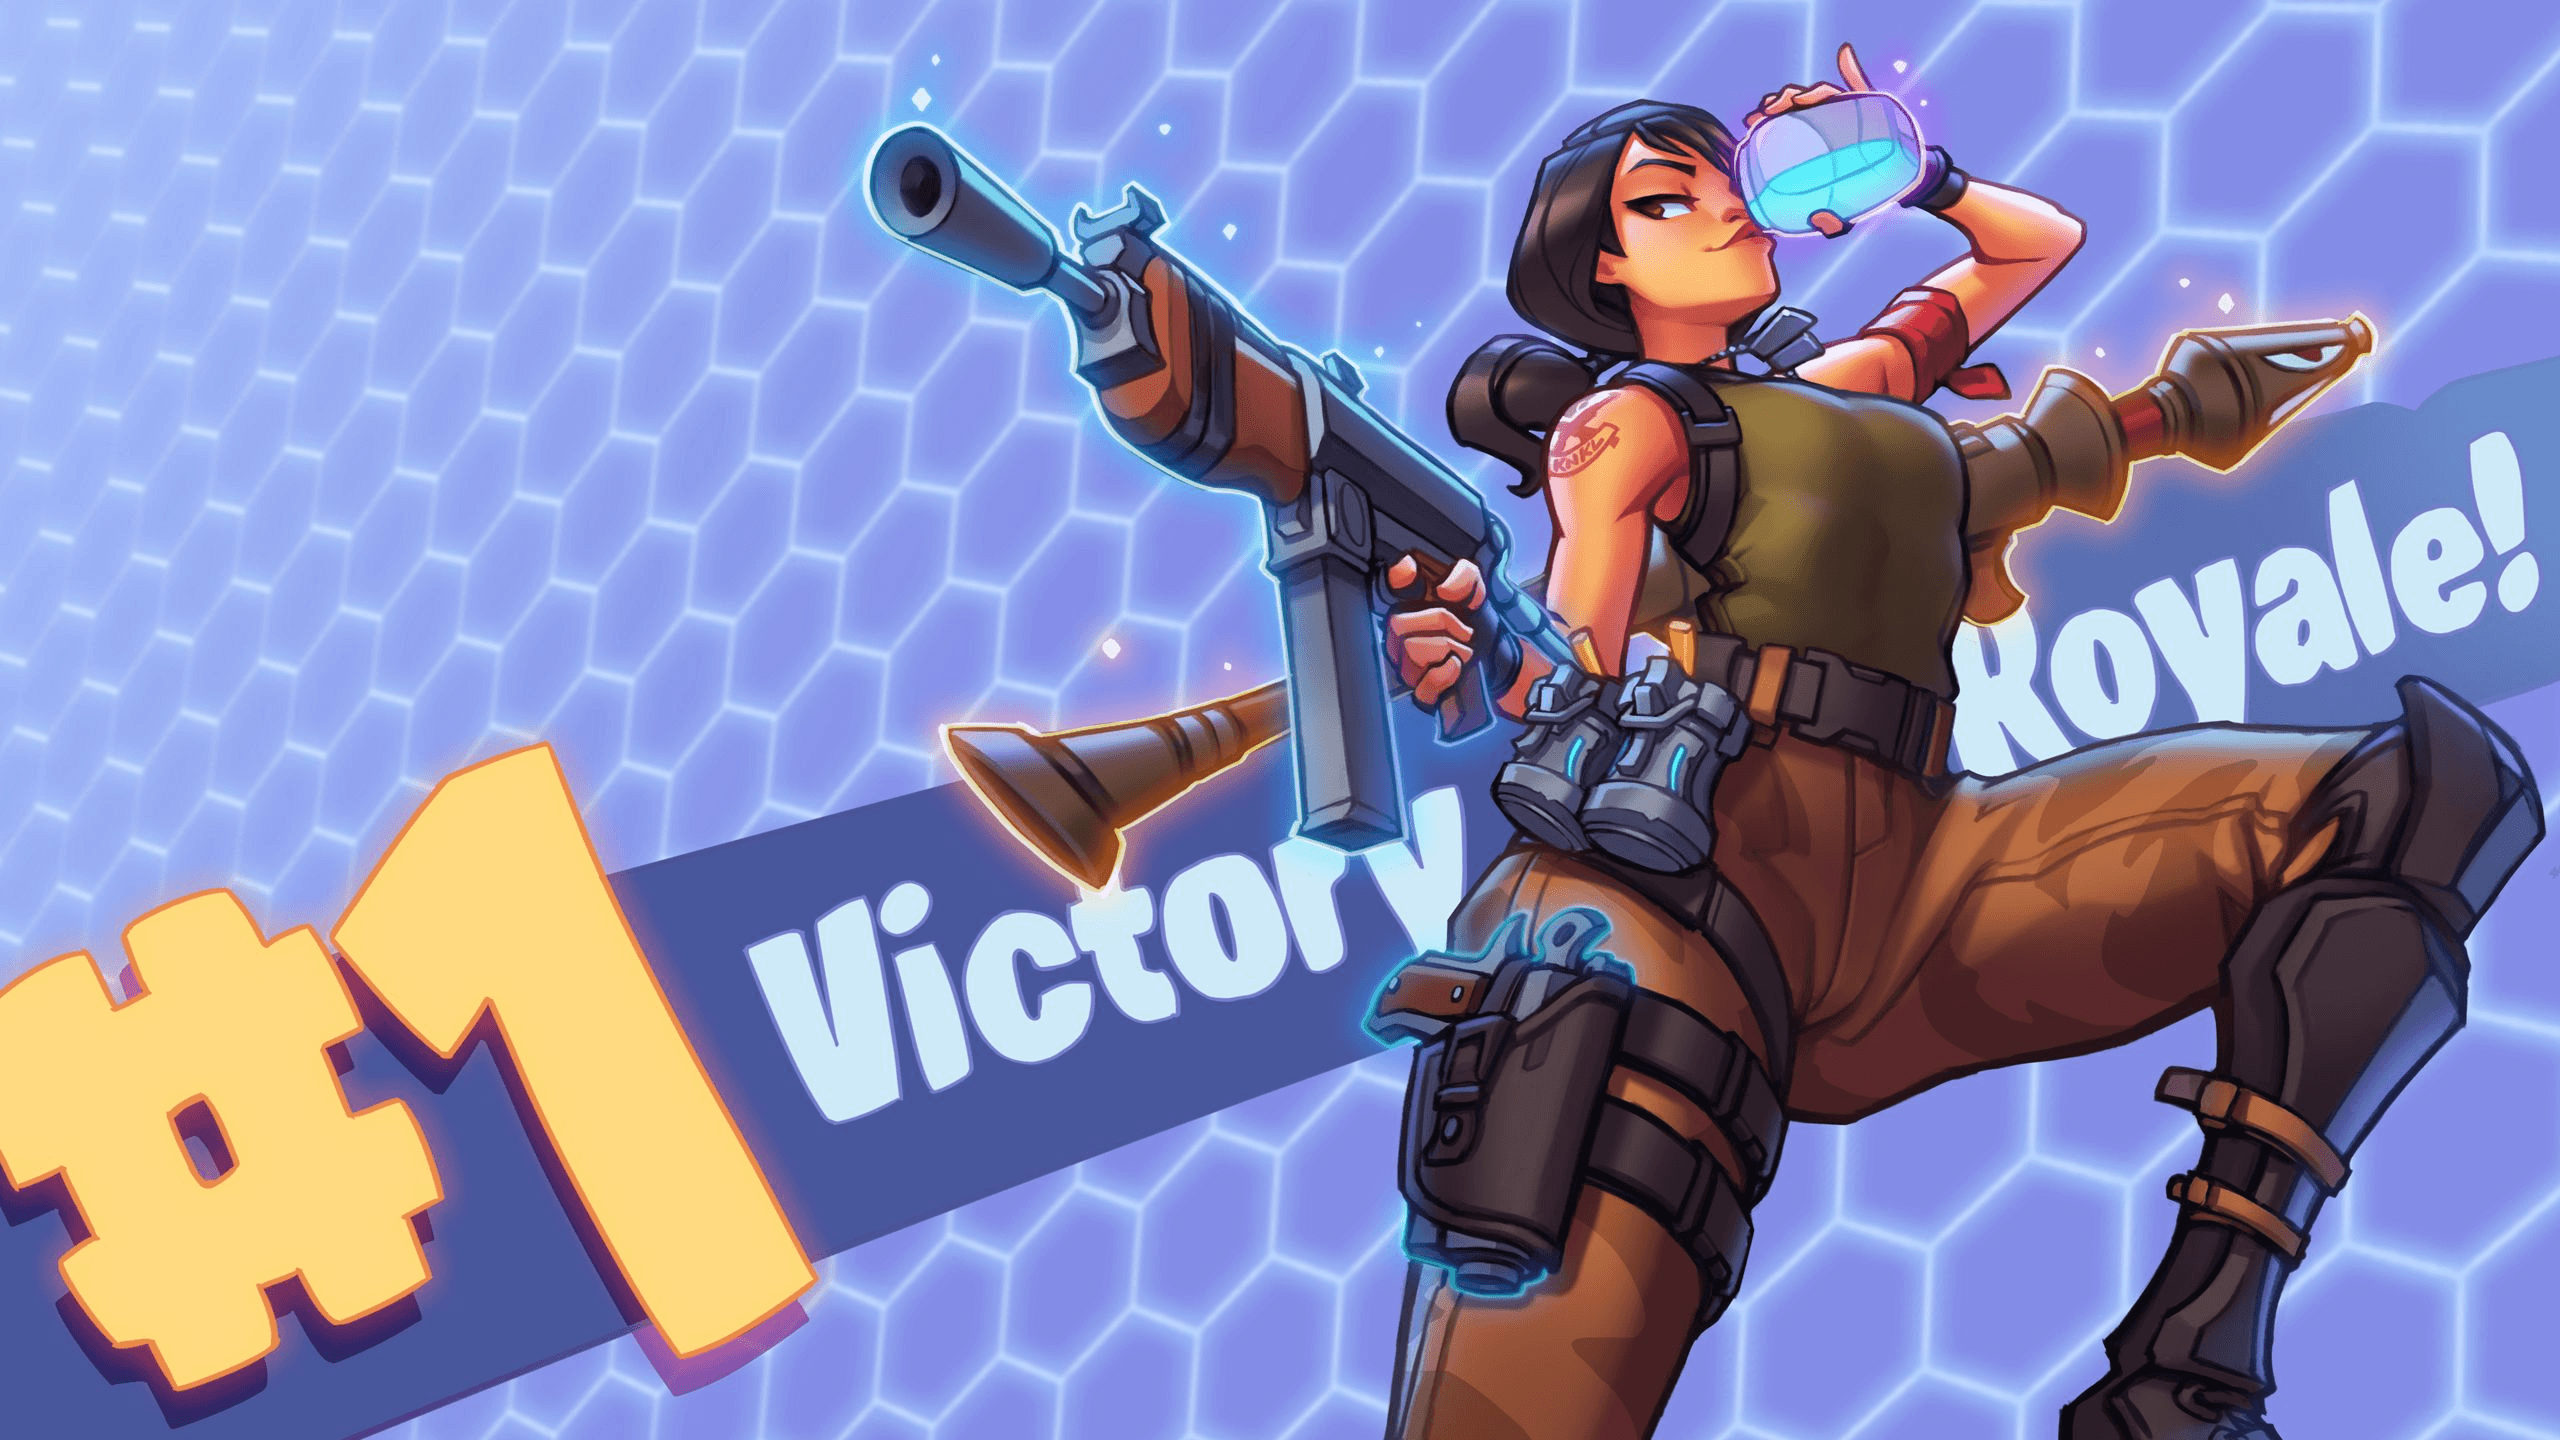 Fortnite Victory Royale Wallpaper in 2020